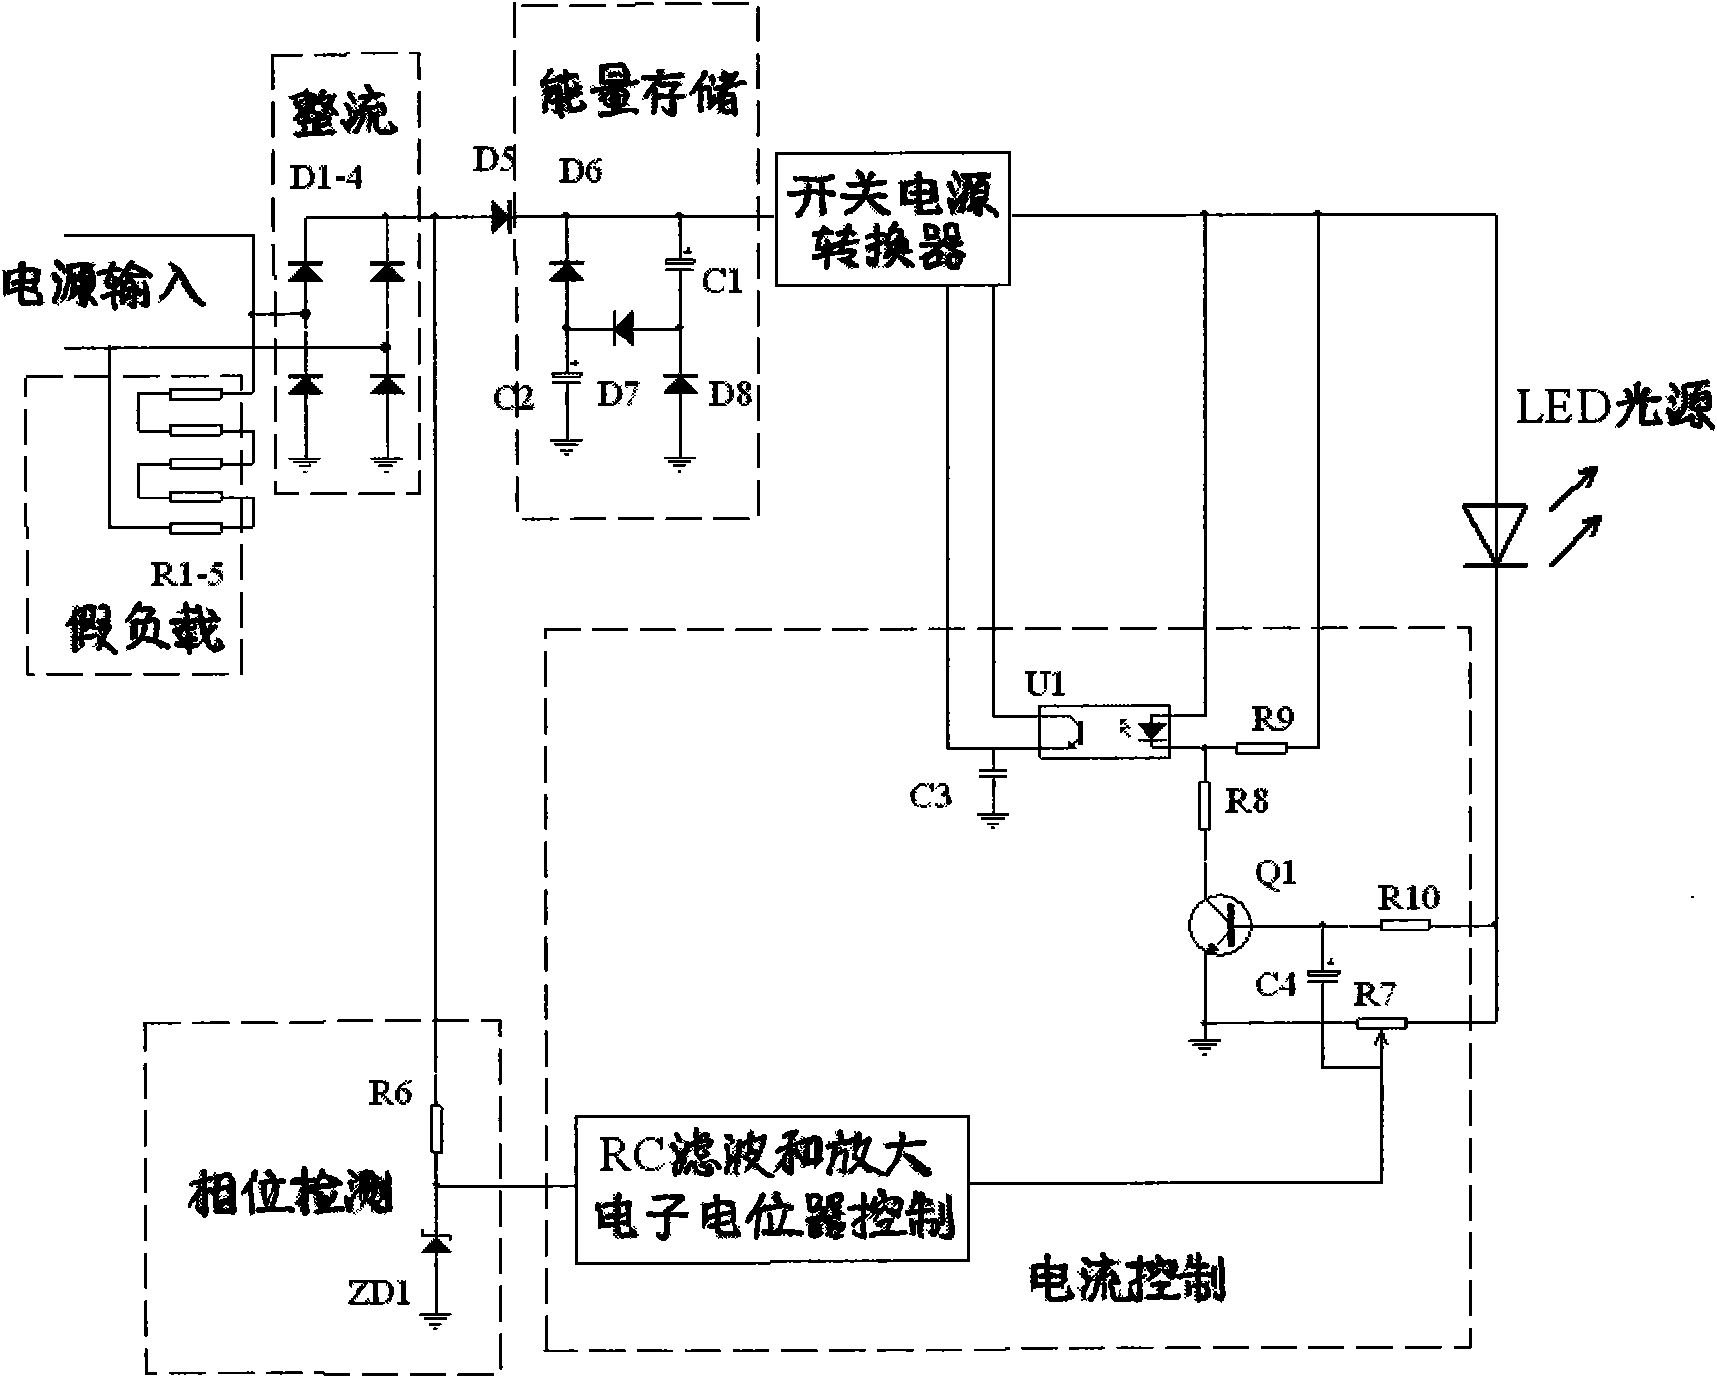 Dimming method applicable to traditional dimmers and LED dimmable drive power